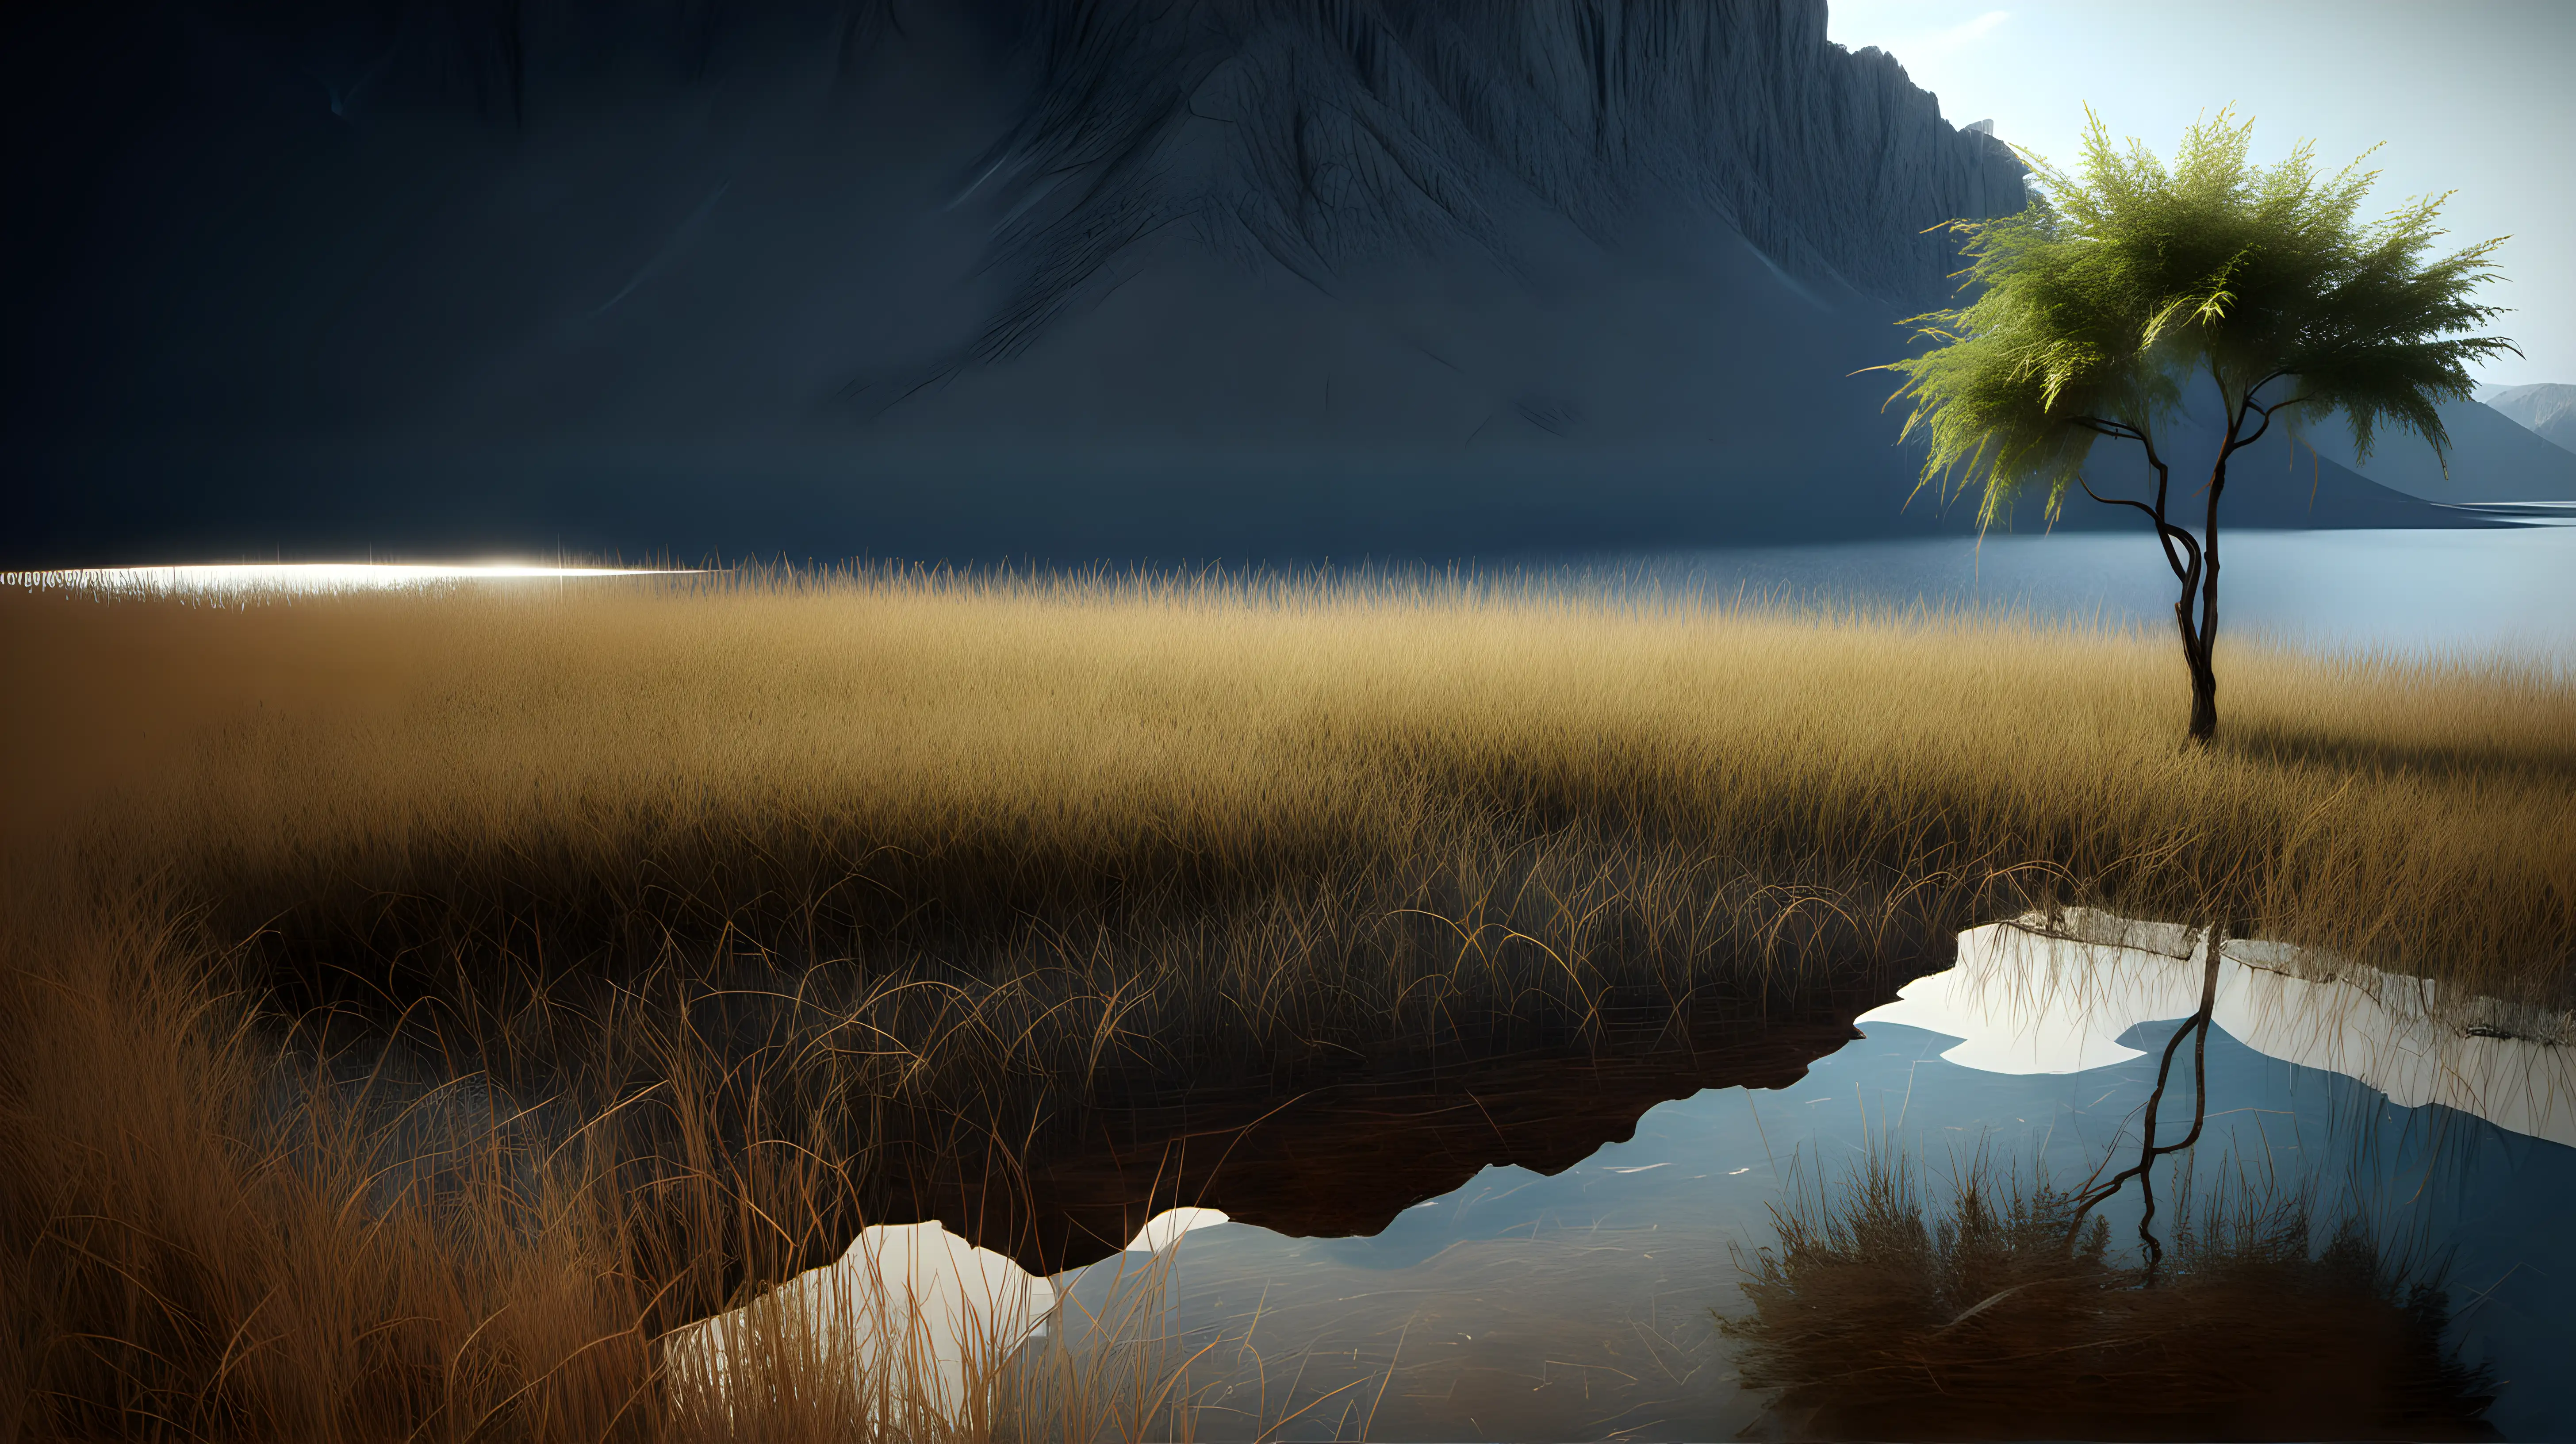 Tranquil Lake Scene with Small Dry Tree and Grass